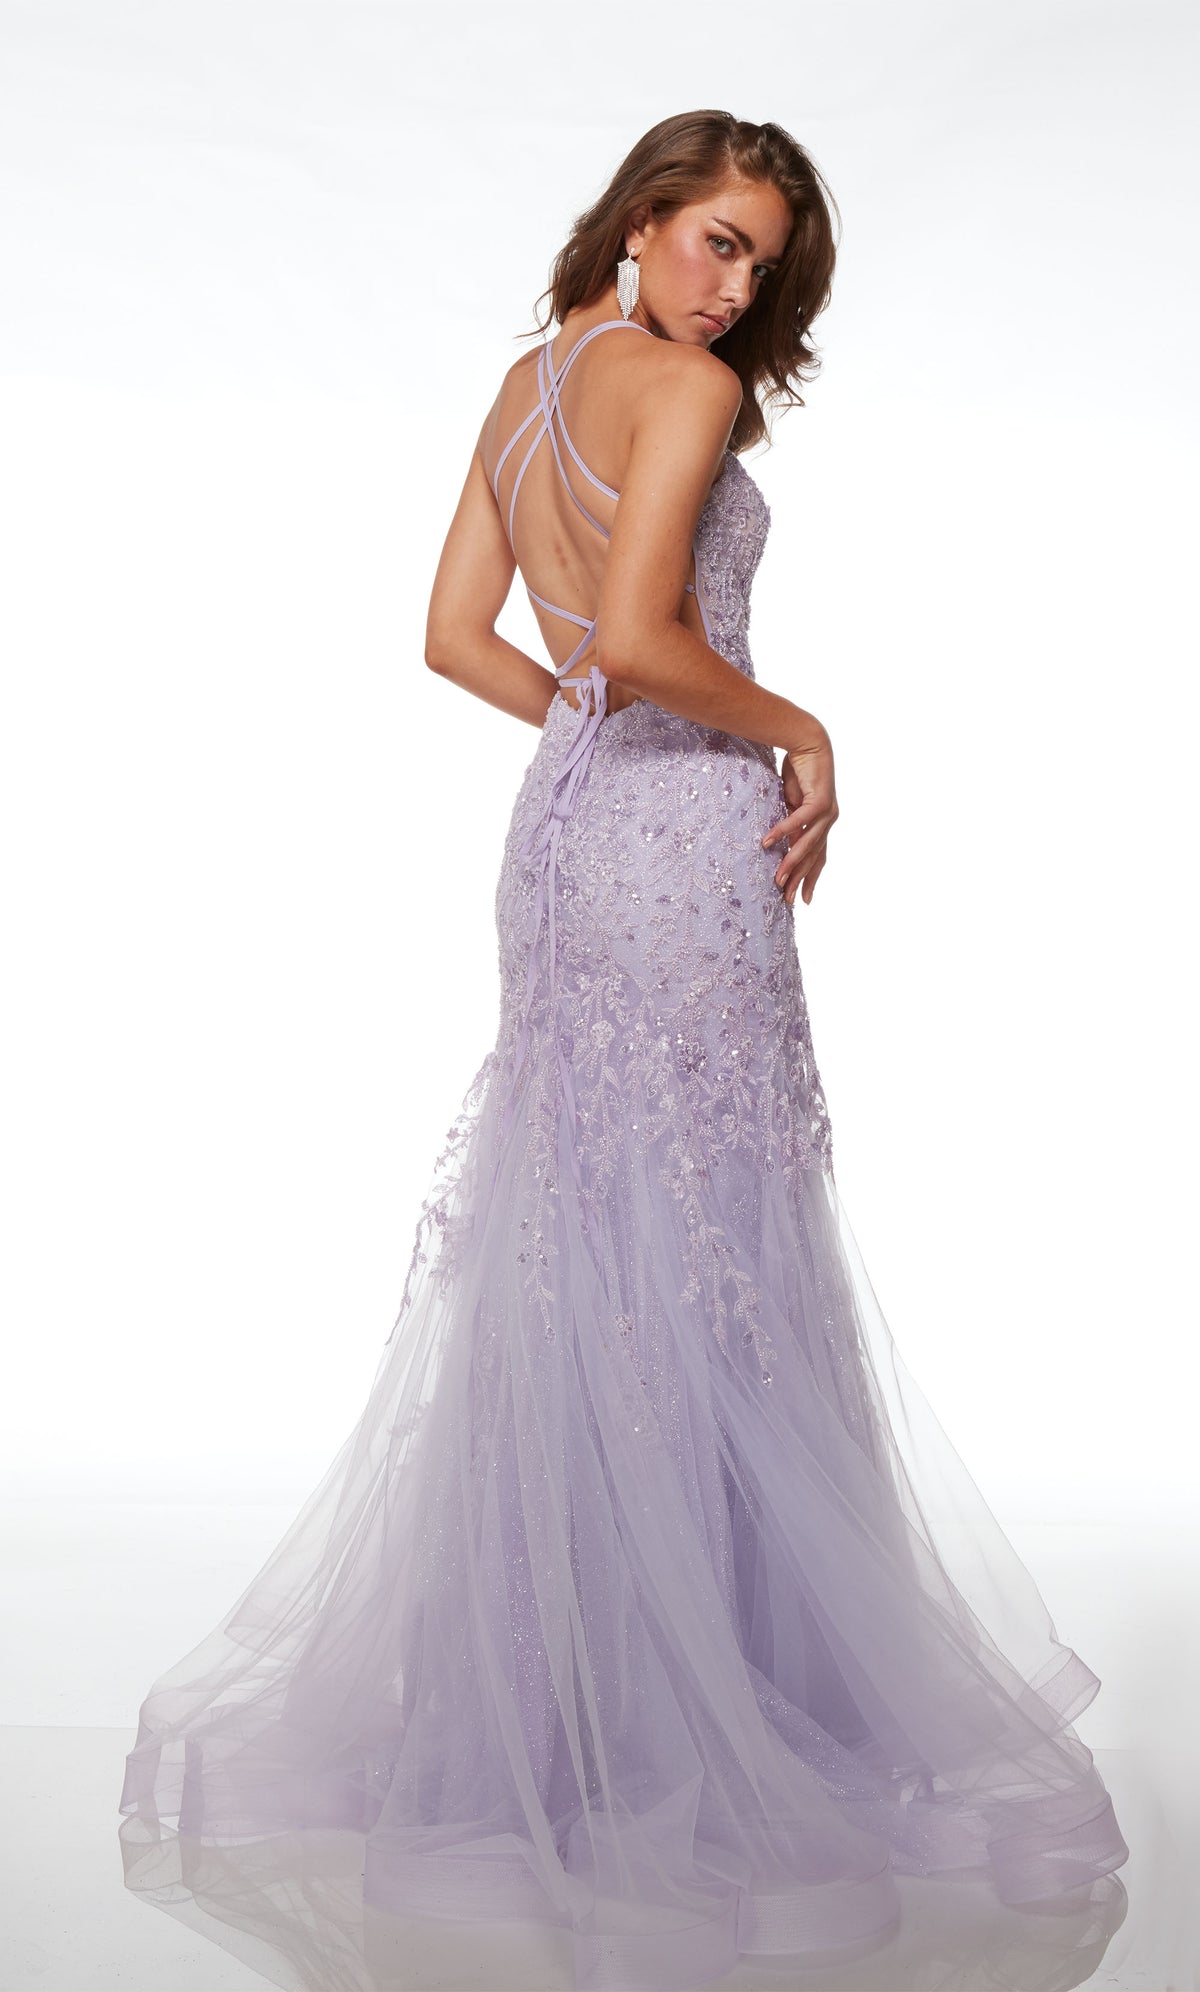 Charming ice lilac mermaid gown: intricate beaded floral lace appliques, sheer corset bodice, dual straps, lace-up back, and layered train for an captivating look.